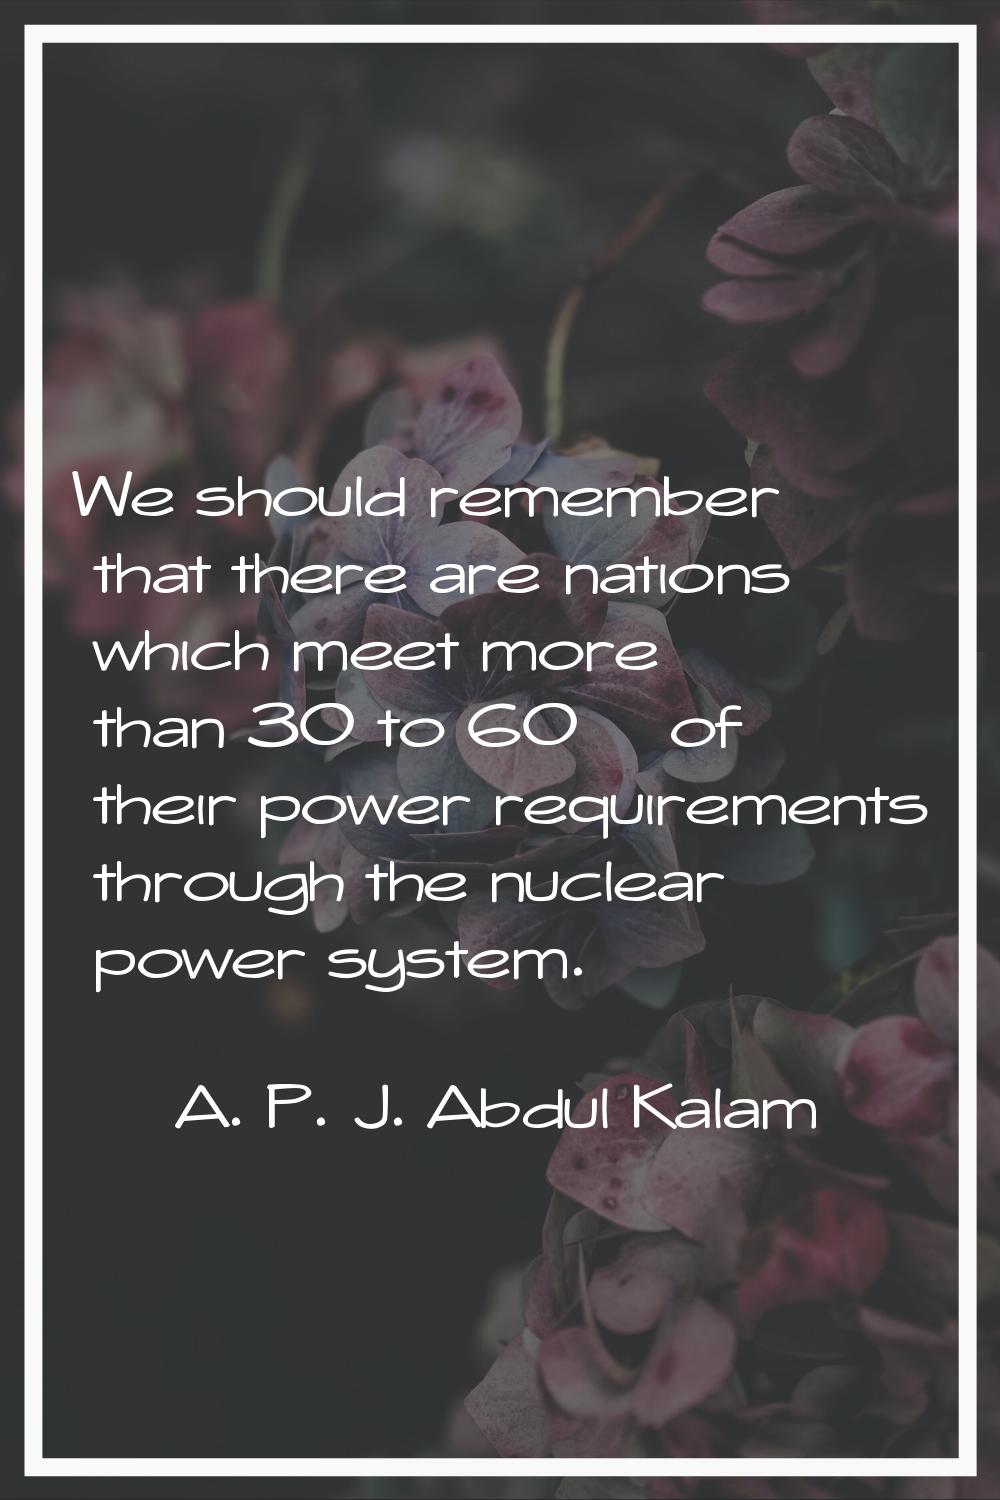 We should remember that there are nations which meet more than 30 to 60% of their power requirement